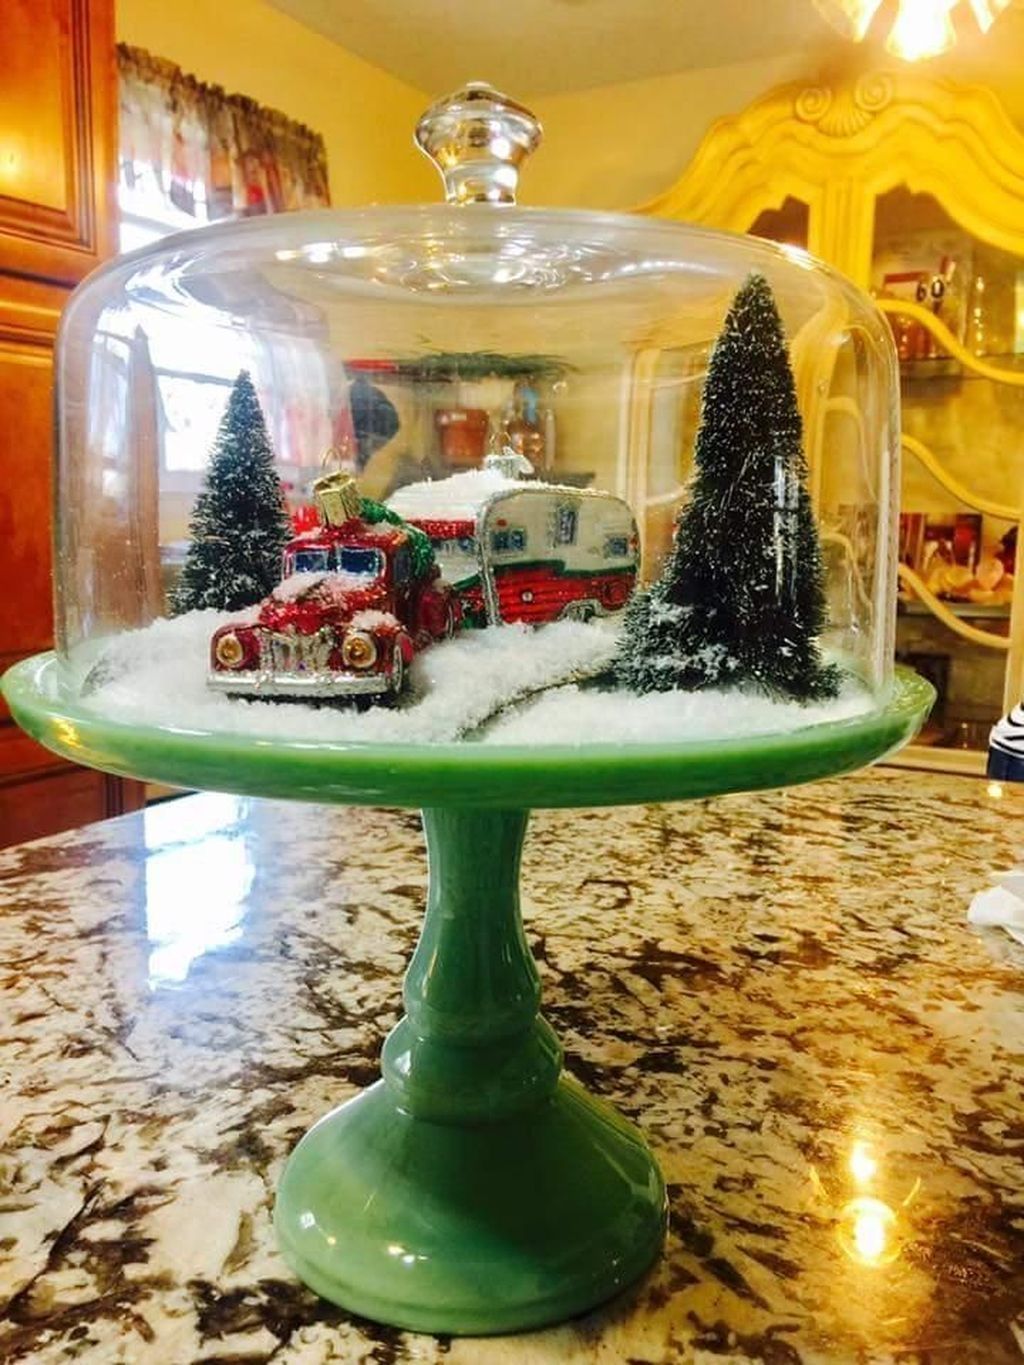 45 Outstanding Christmas Cake Stand Decor Ideas To Deck The Halls -   14 cake Christmas 2019 ideas